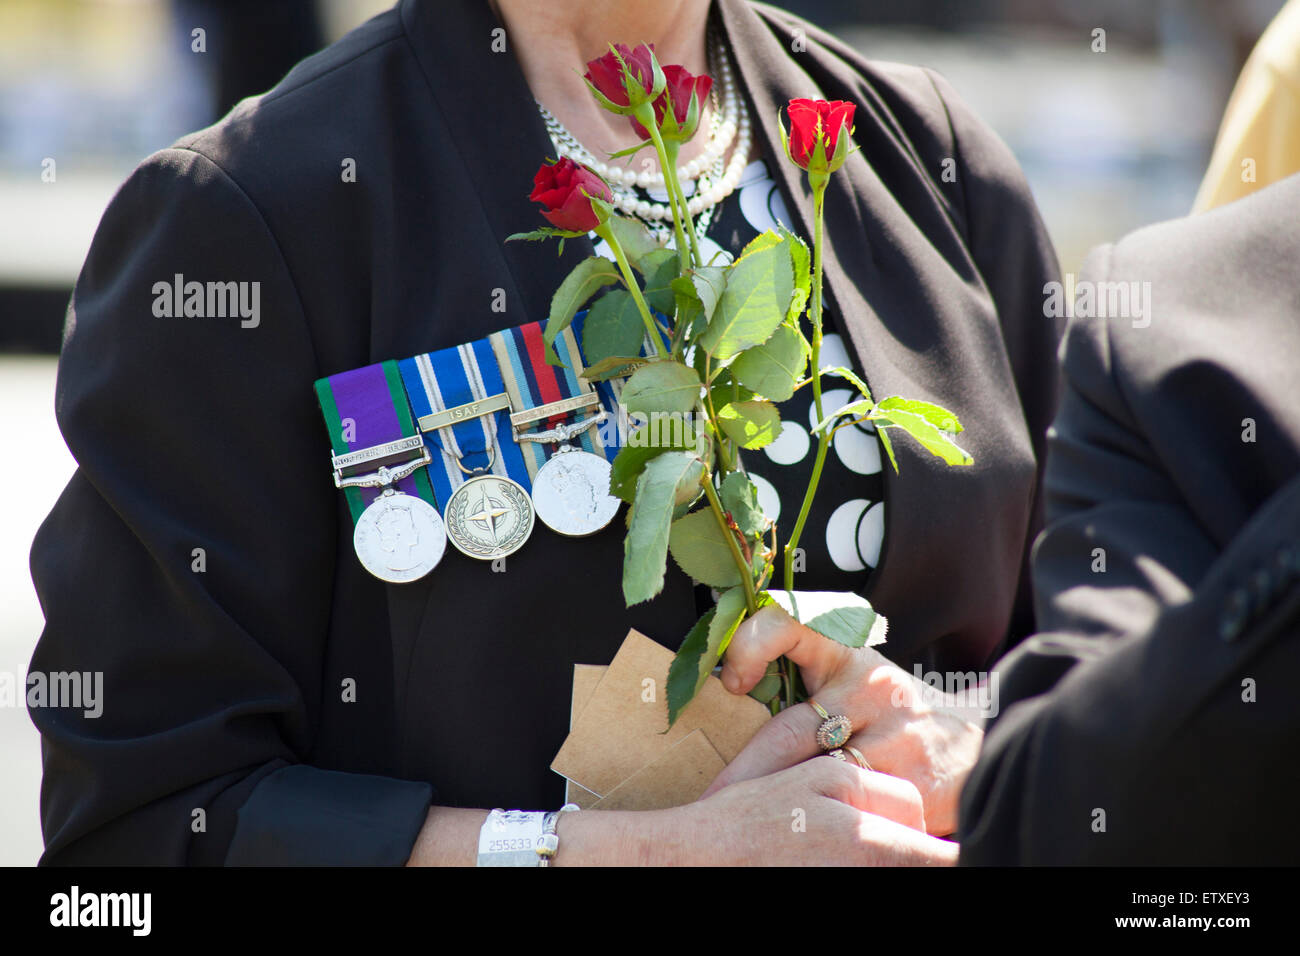 A Guest arriving at the Bastion dedication service at the National Memorial Arboretum carrying roses Stock Photo